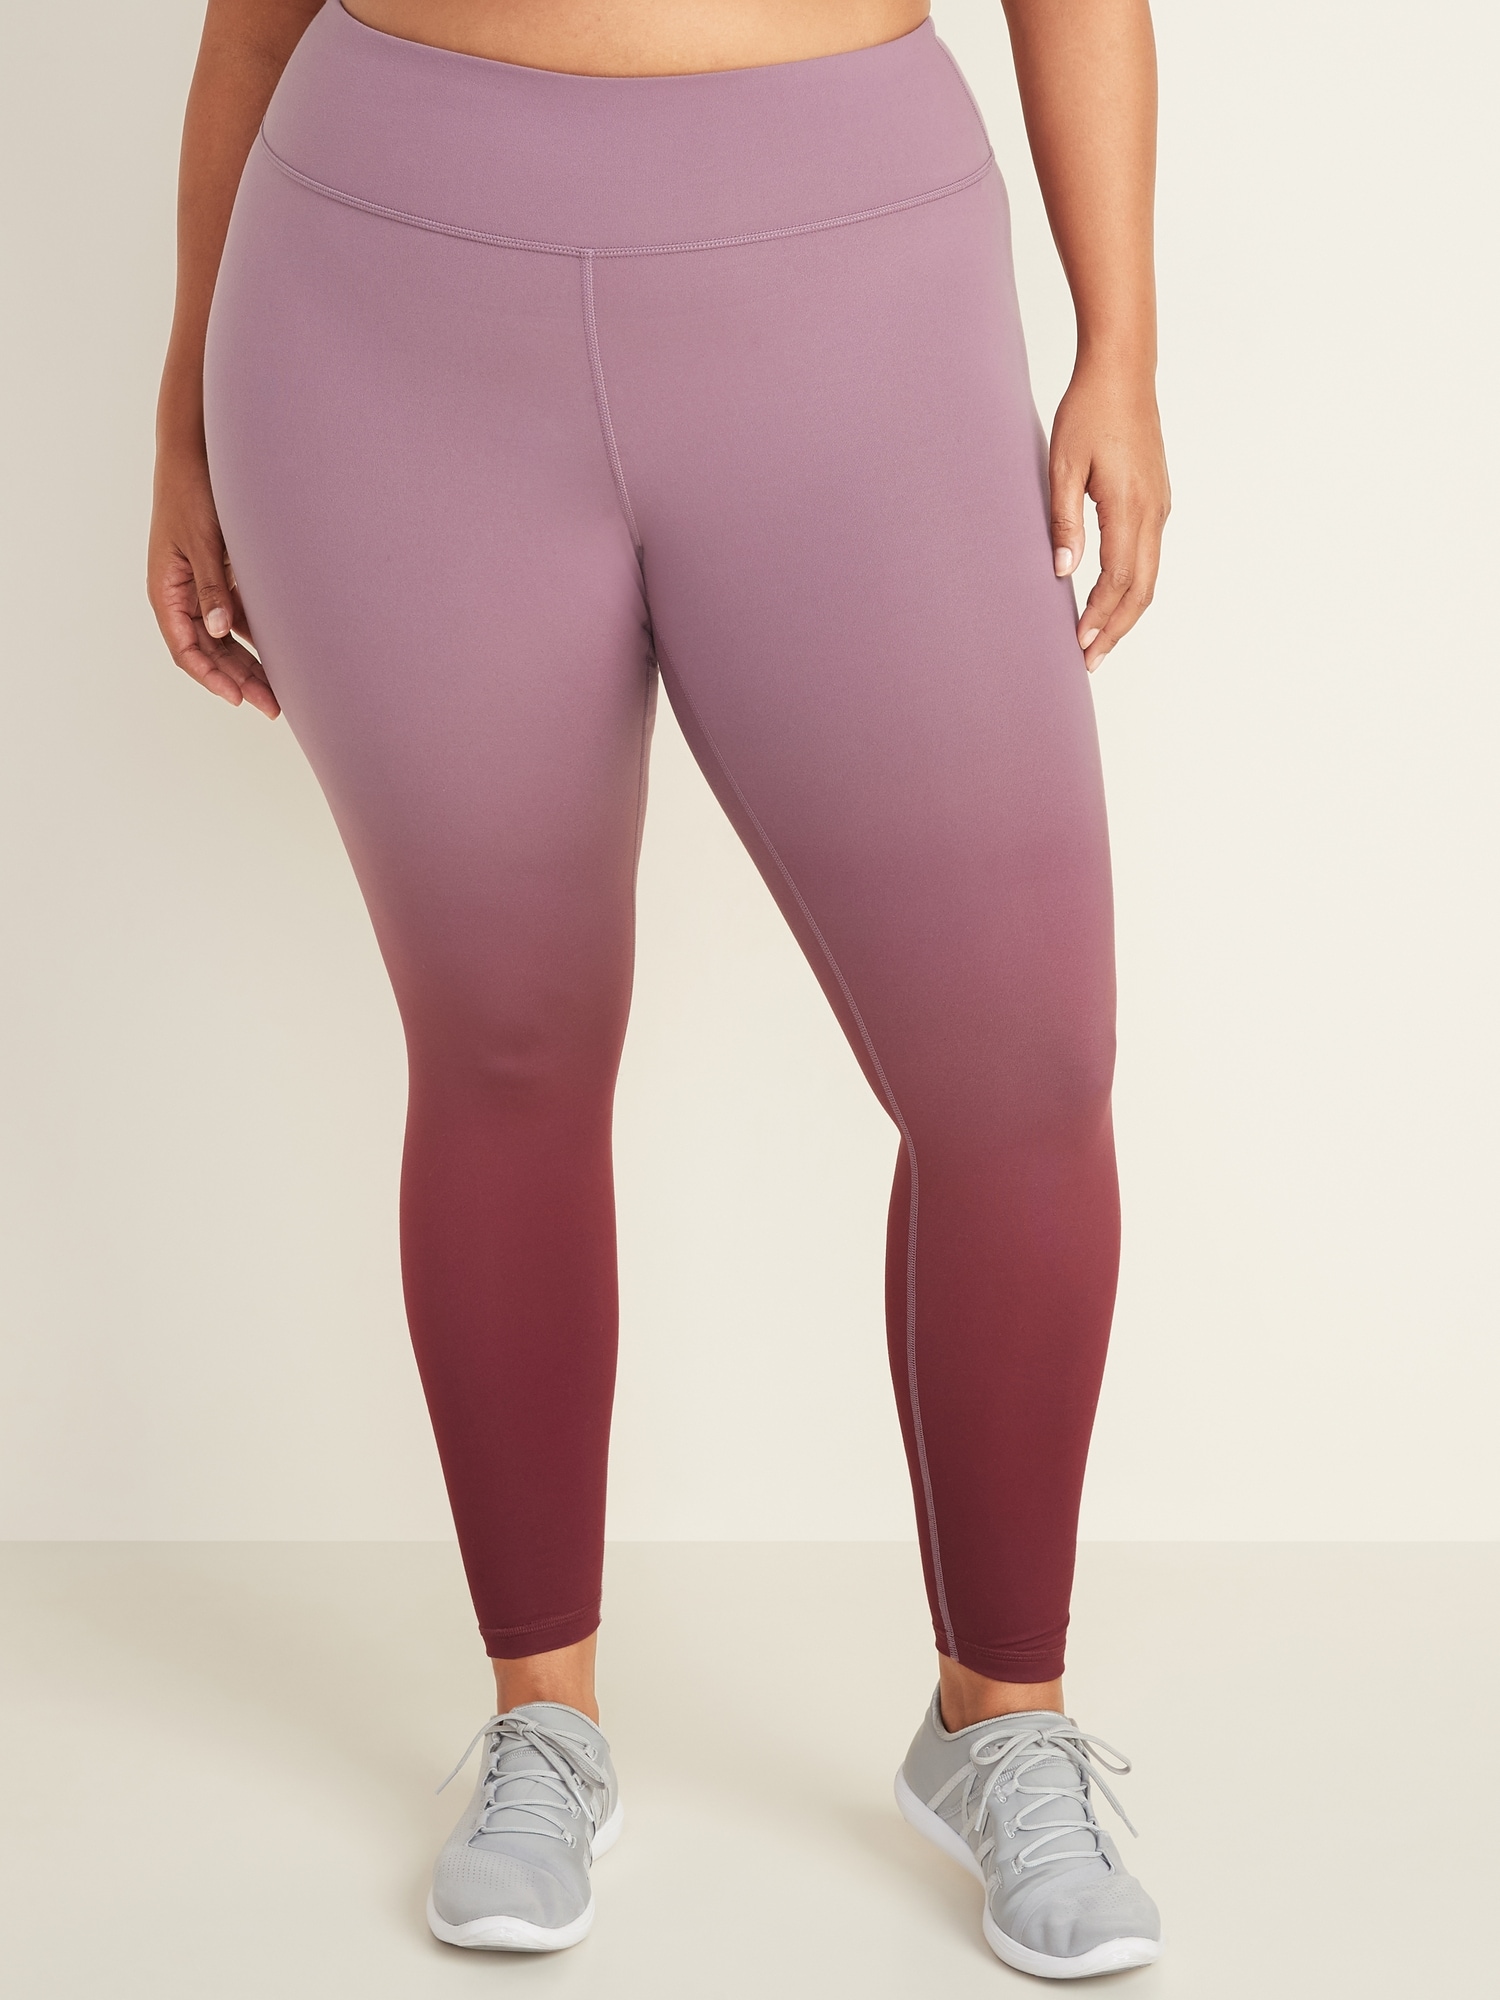 PLUS-Old Navy Women's High-Waisted Elevate Compression Leggings